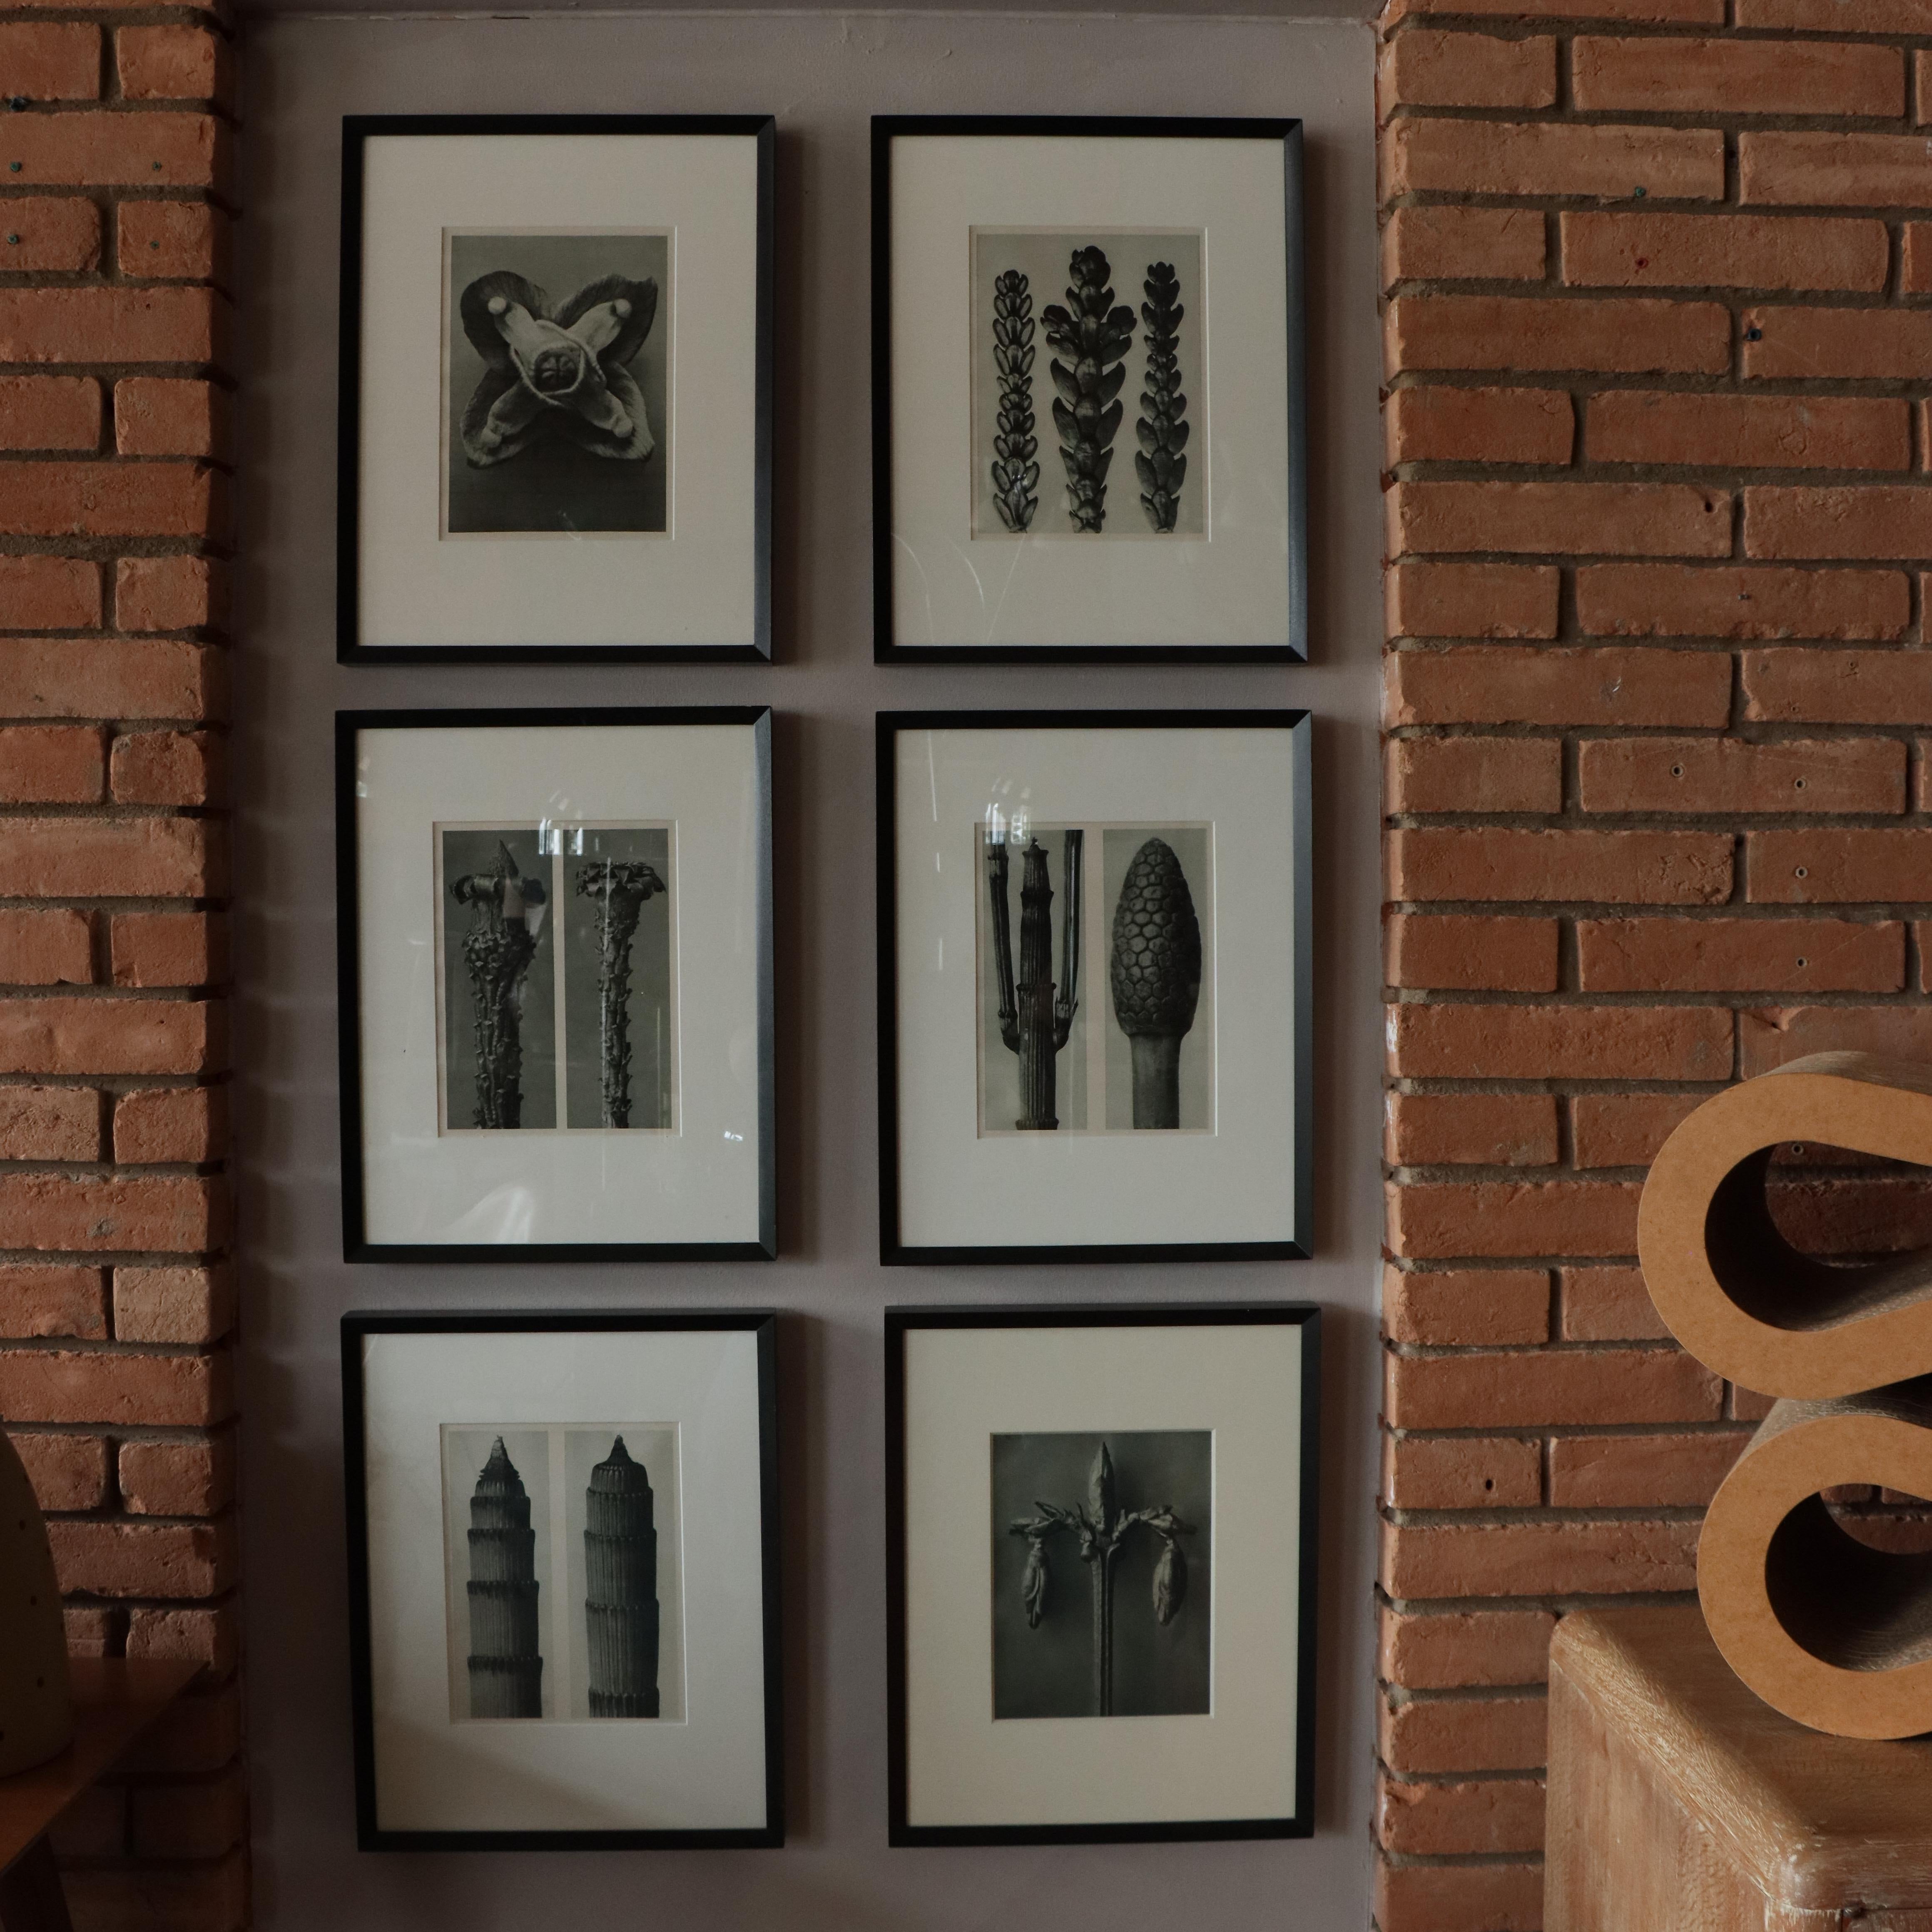 Grouping of six (6) Karl Blossfeldt framed photogravures from the 1942 of the book 'Wunder in der Natur.' Blossfeldt, a German photographer, and sculptor, left a massive mark with his iconic detailed photographs of plants. Shown in the renowned